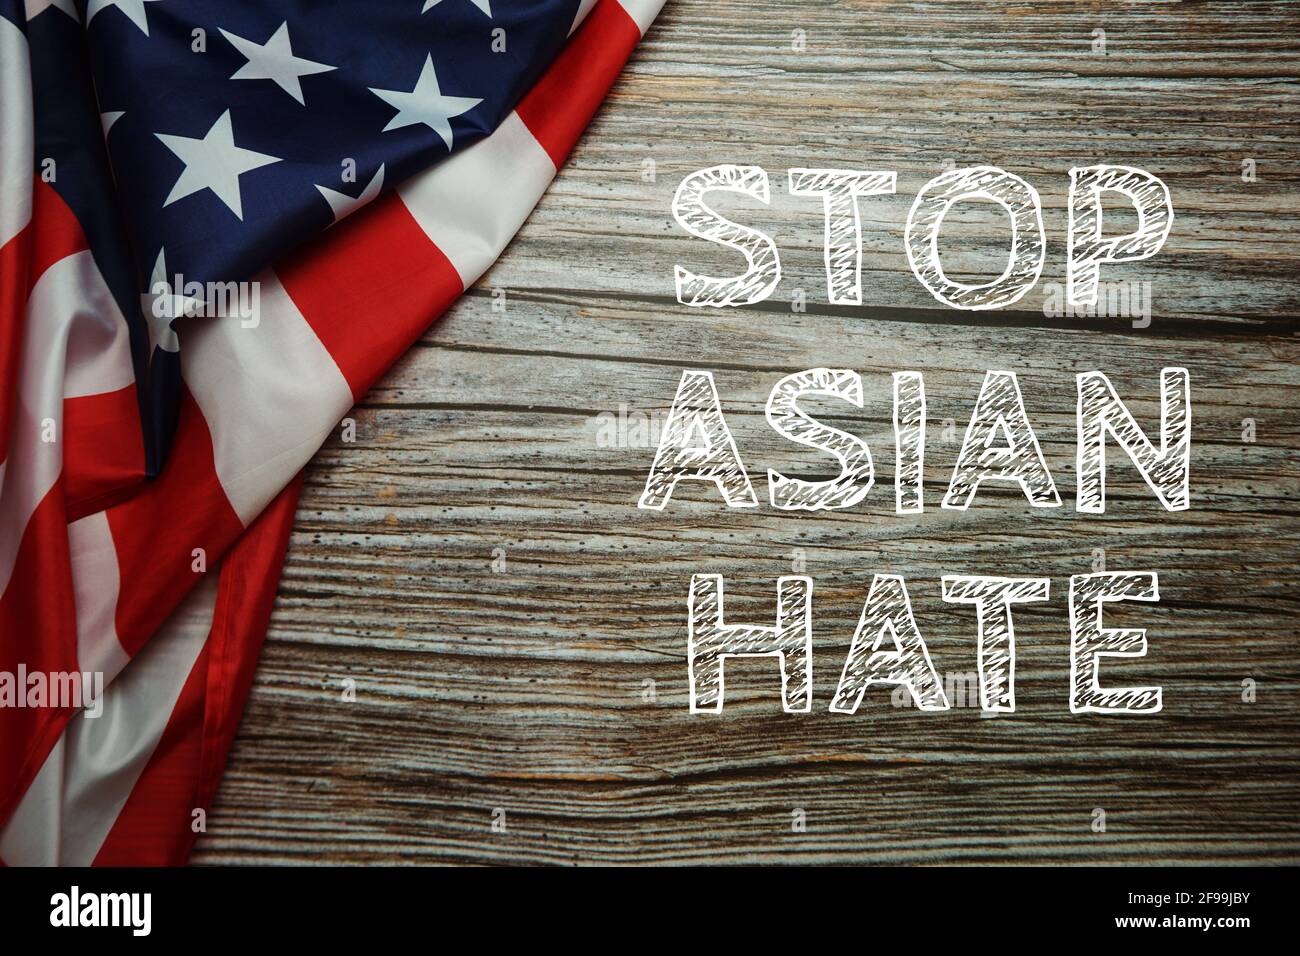 Stop Asian Hate text with USA flag on wooden background Stock Photo